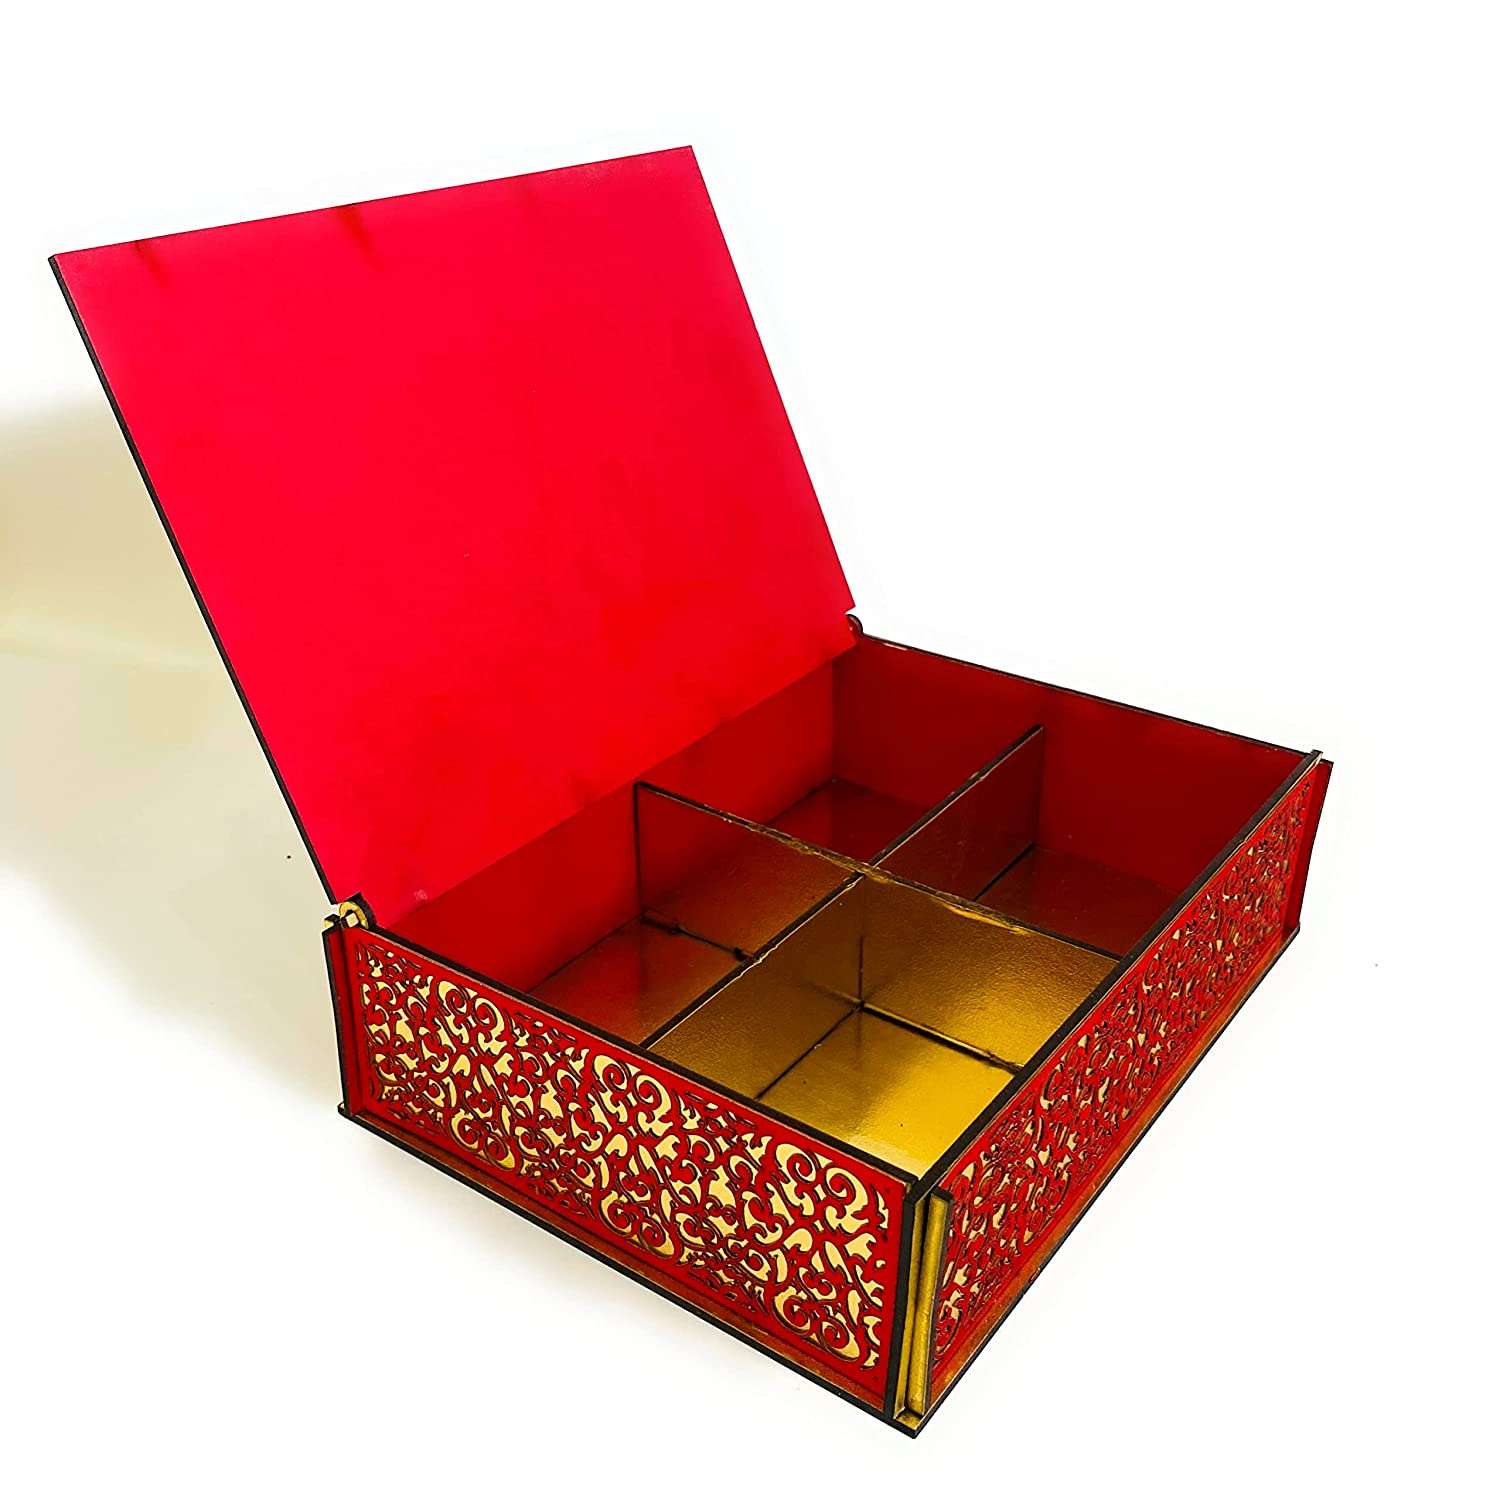 PREMIUM WOODEN BOX – Between Boxes Gifts